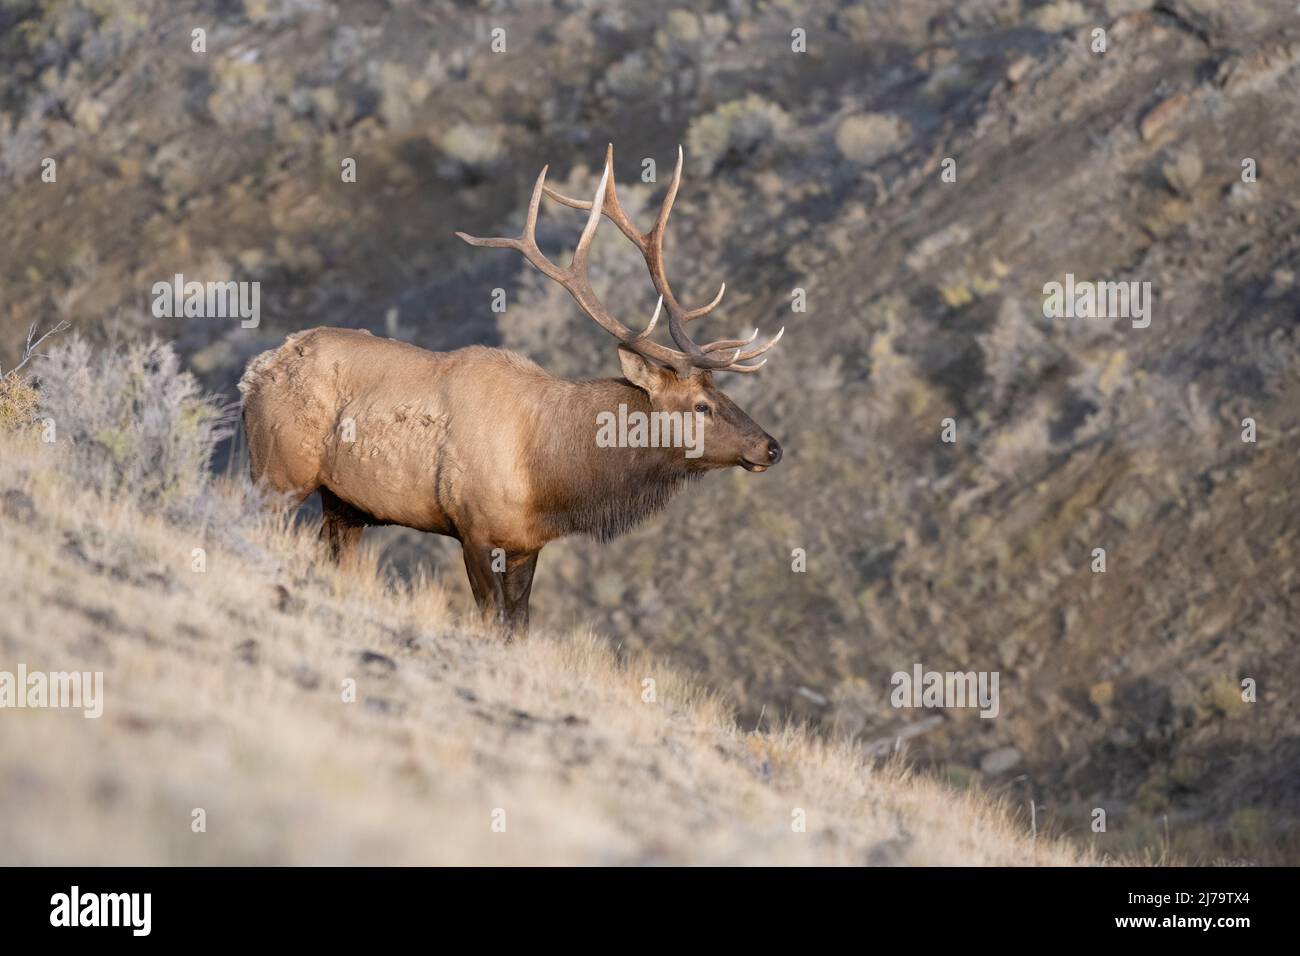 Bull Elk (Cervus canadensis). October in Yellowstone National Park, Wyoming, USA. Stock Photo